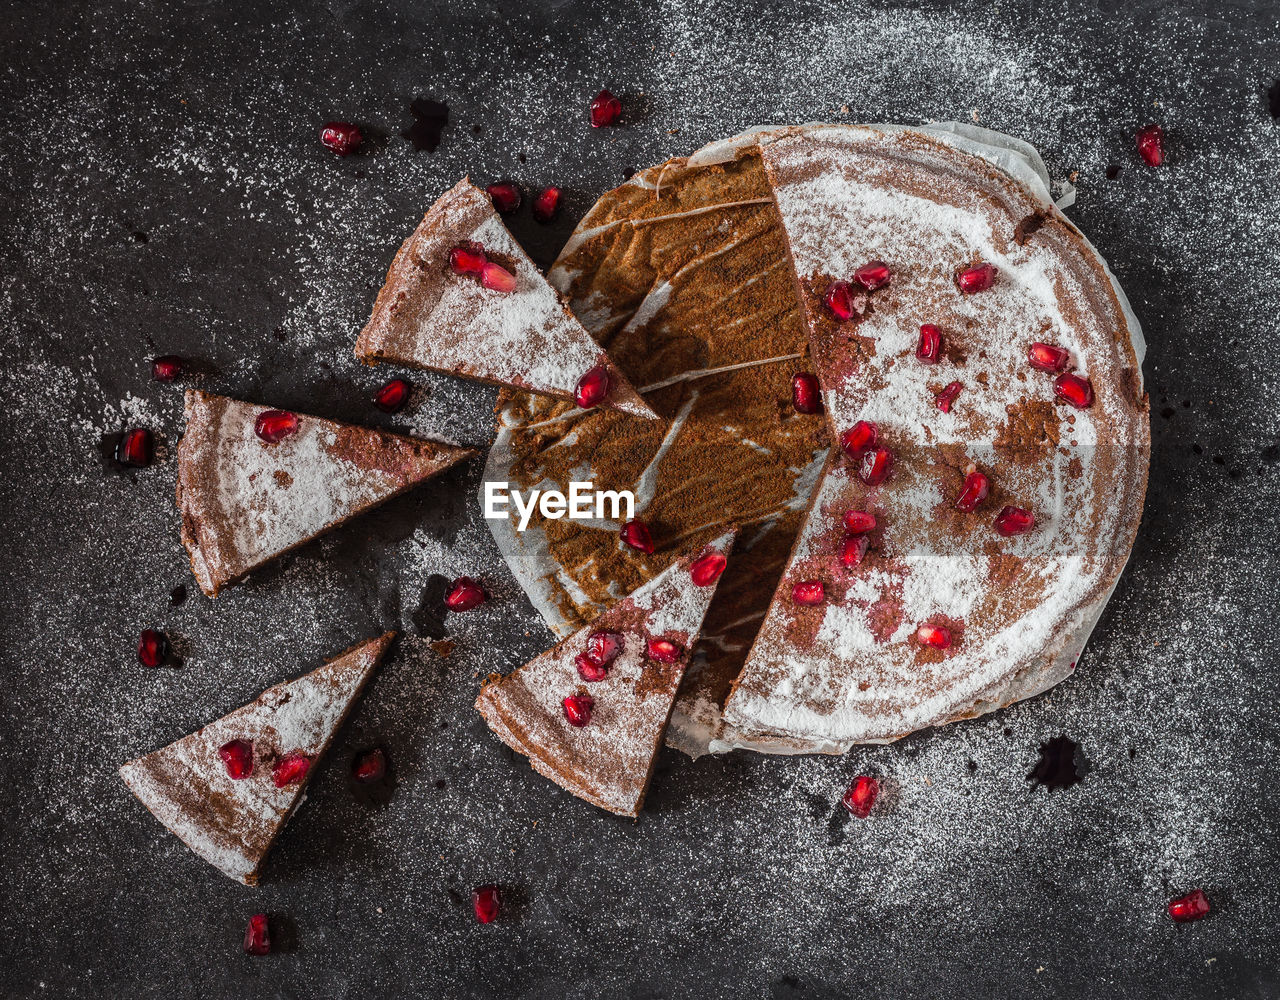 High angle view of chocolate cake with pomegranate seeds on table